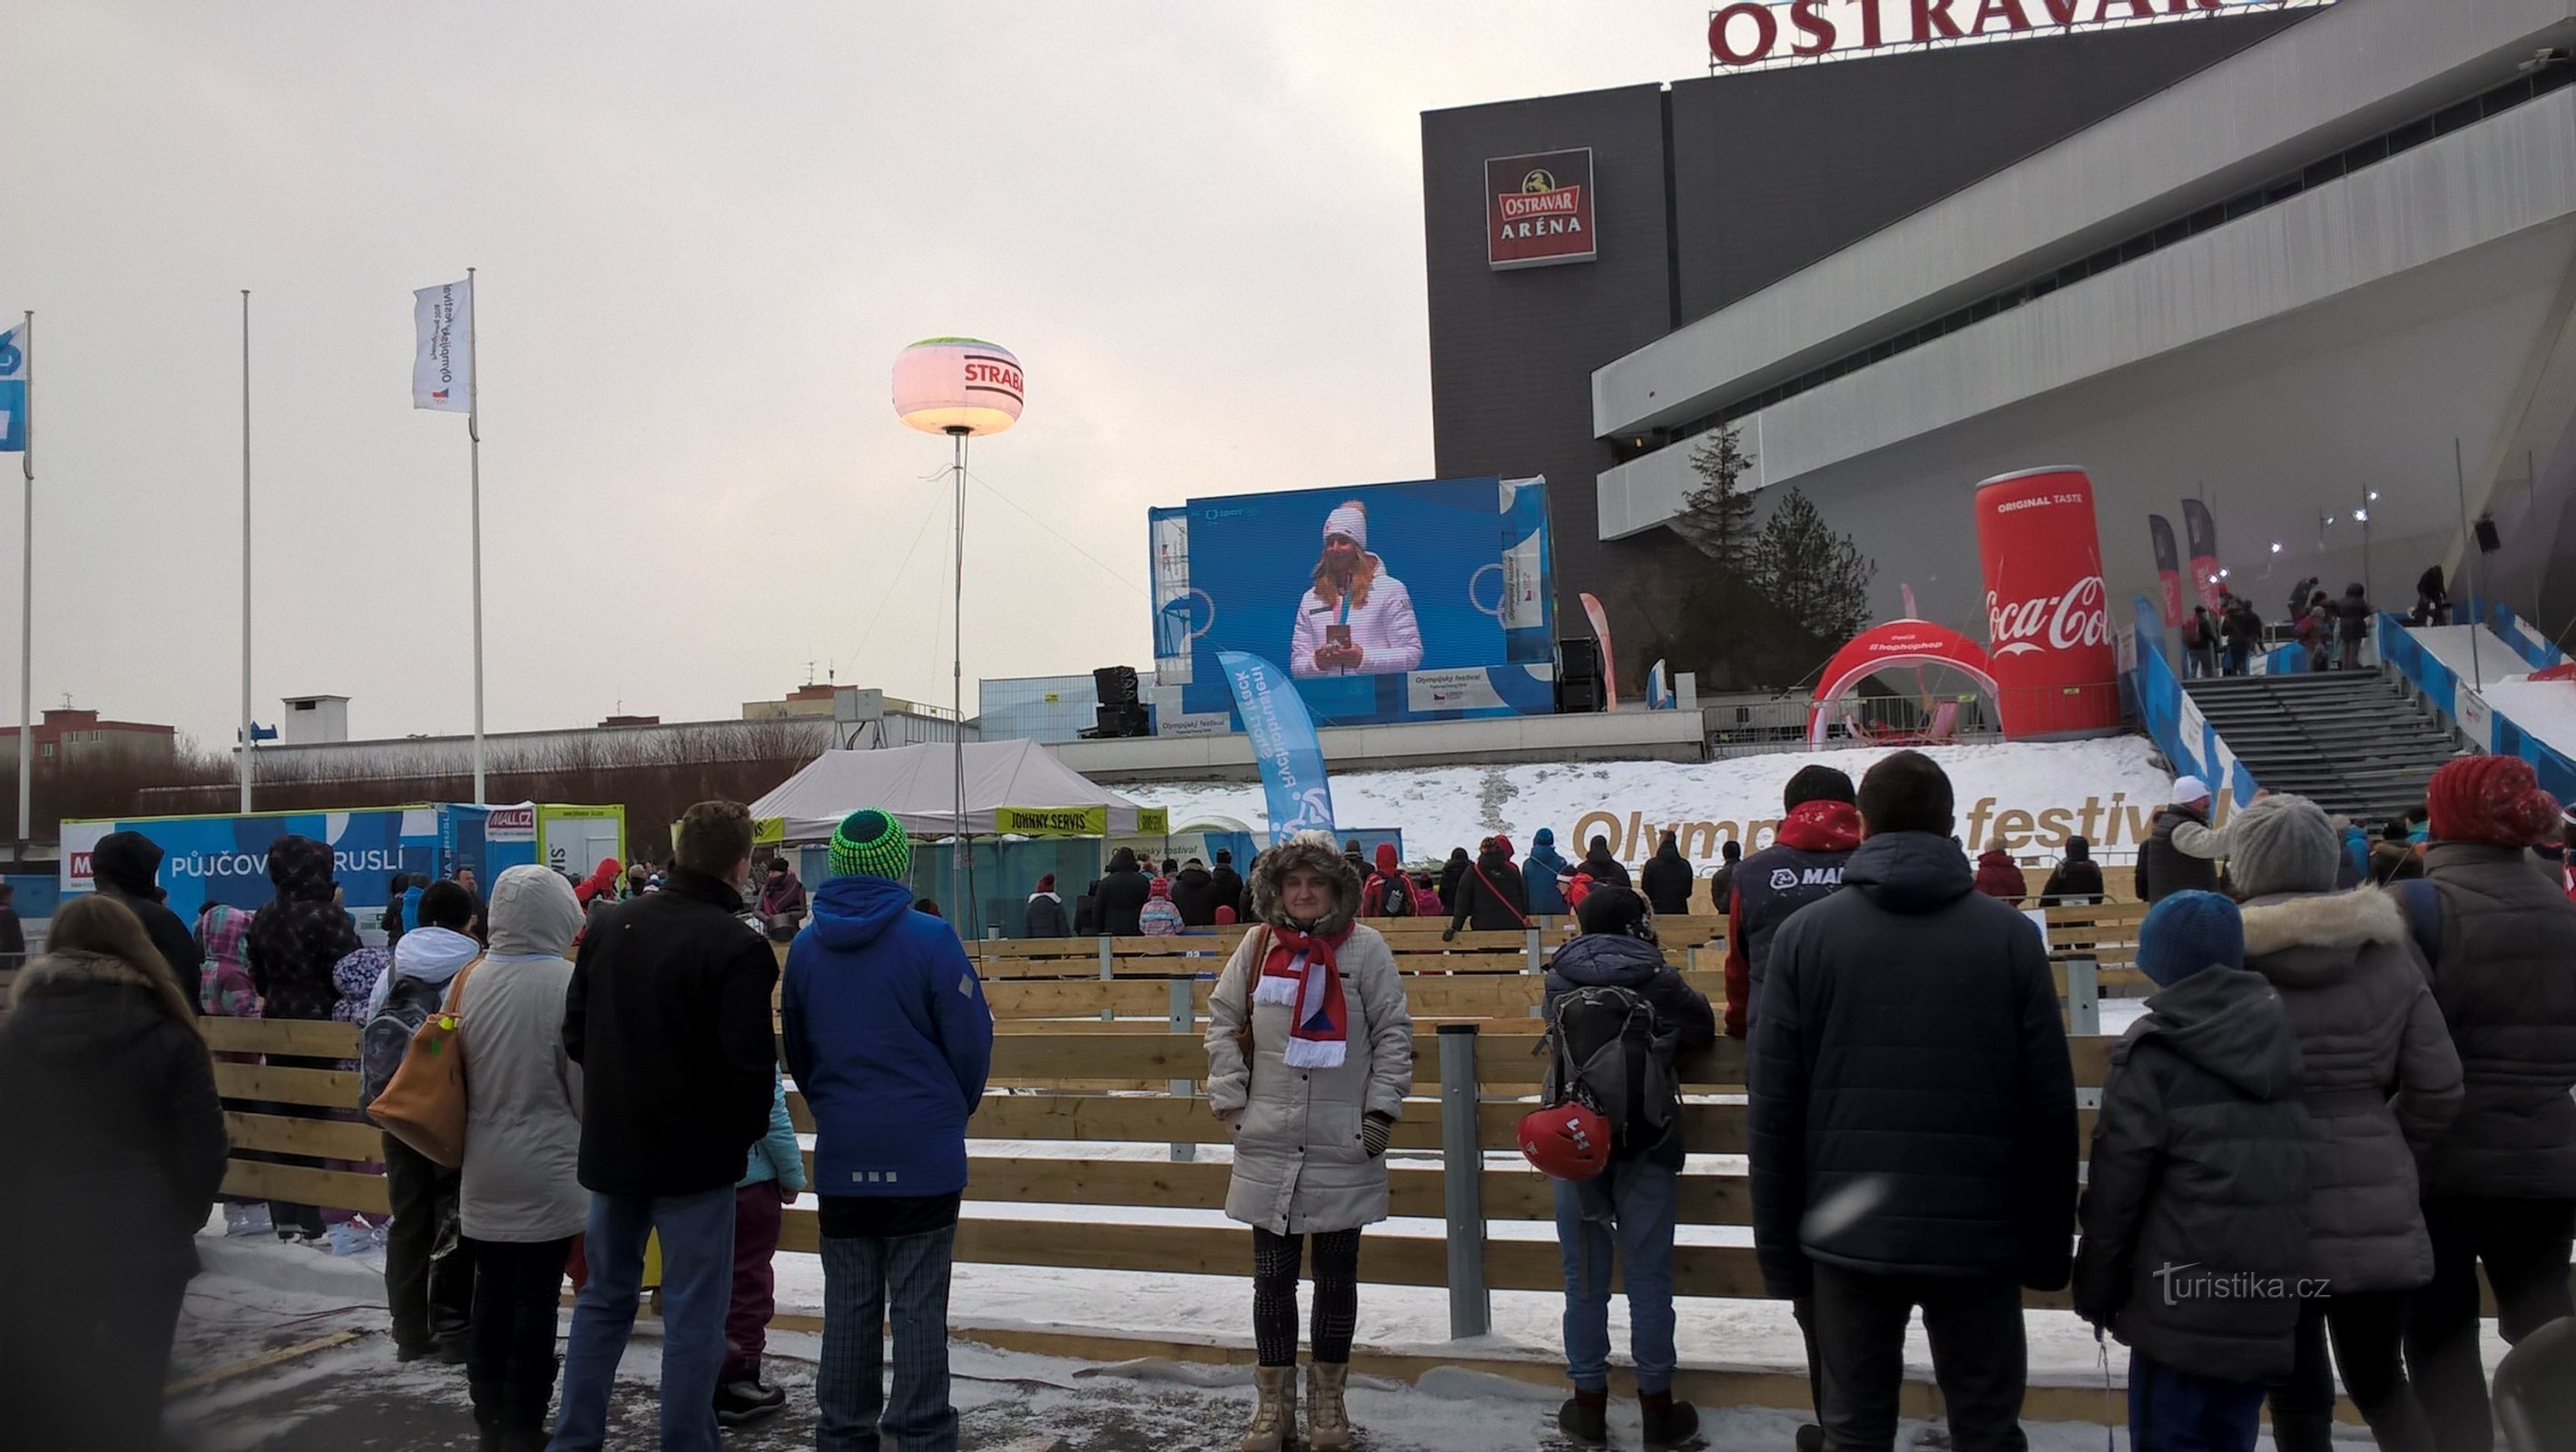 Olympic Festival PyeongChang 2018 in Ostrava